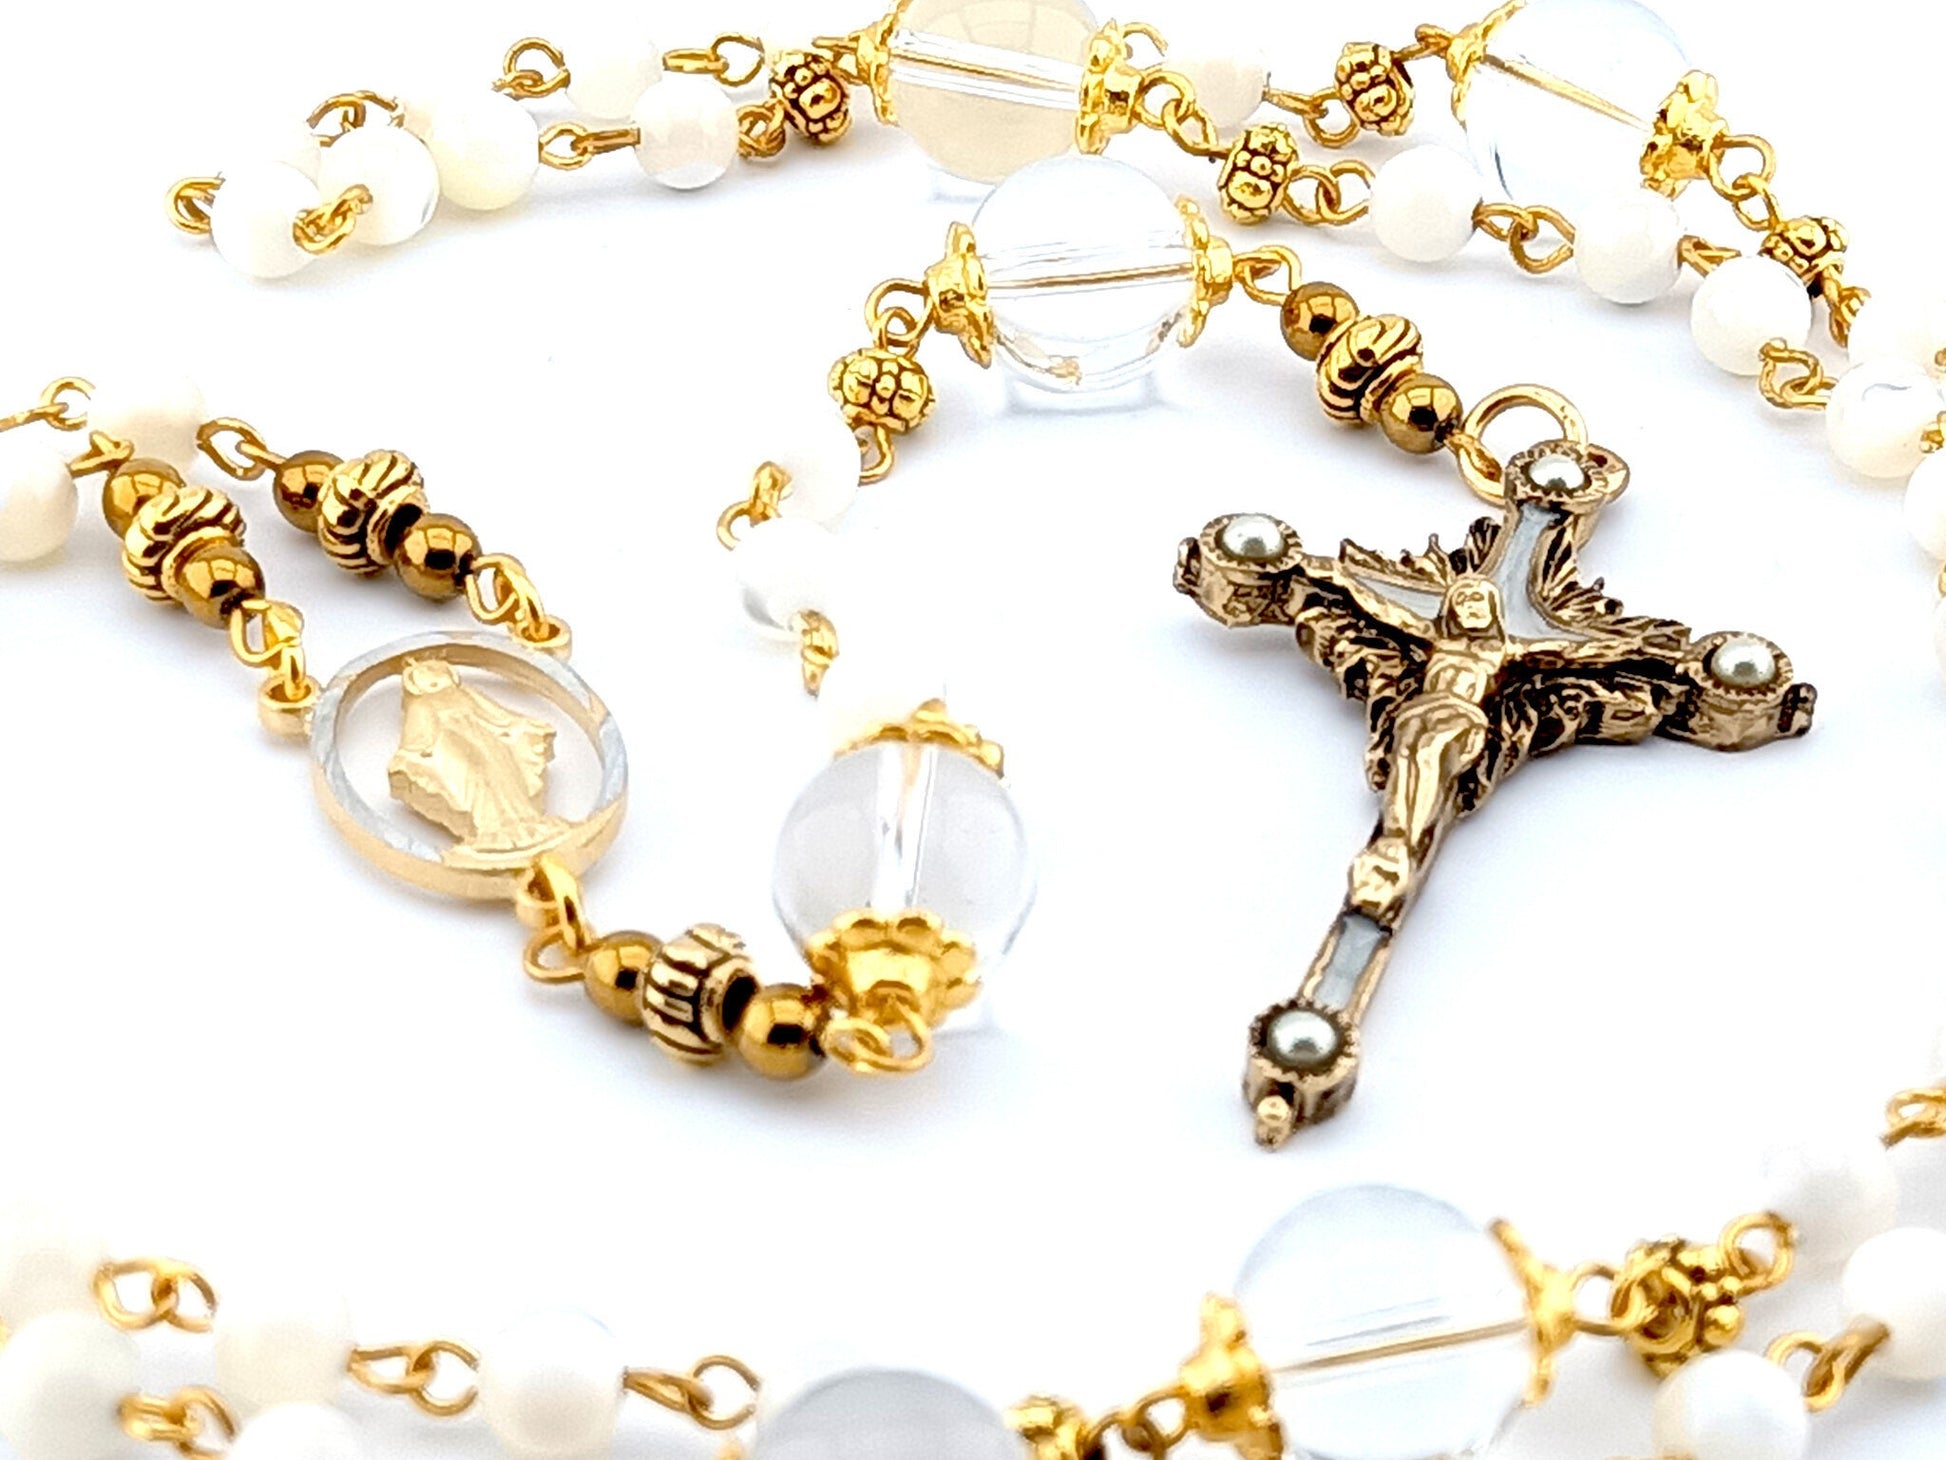 Miraculous Medal unique rosary beads with mother of pearl and glass beads, pewter crucifix and golden linking beads.